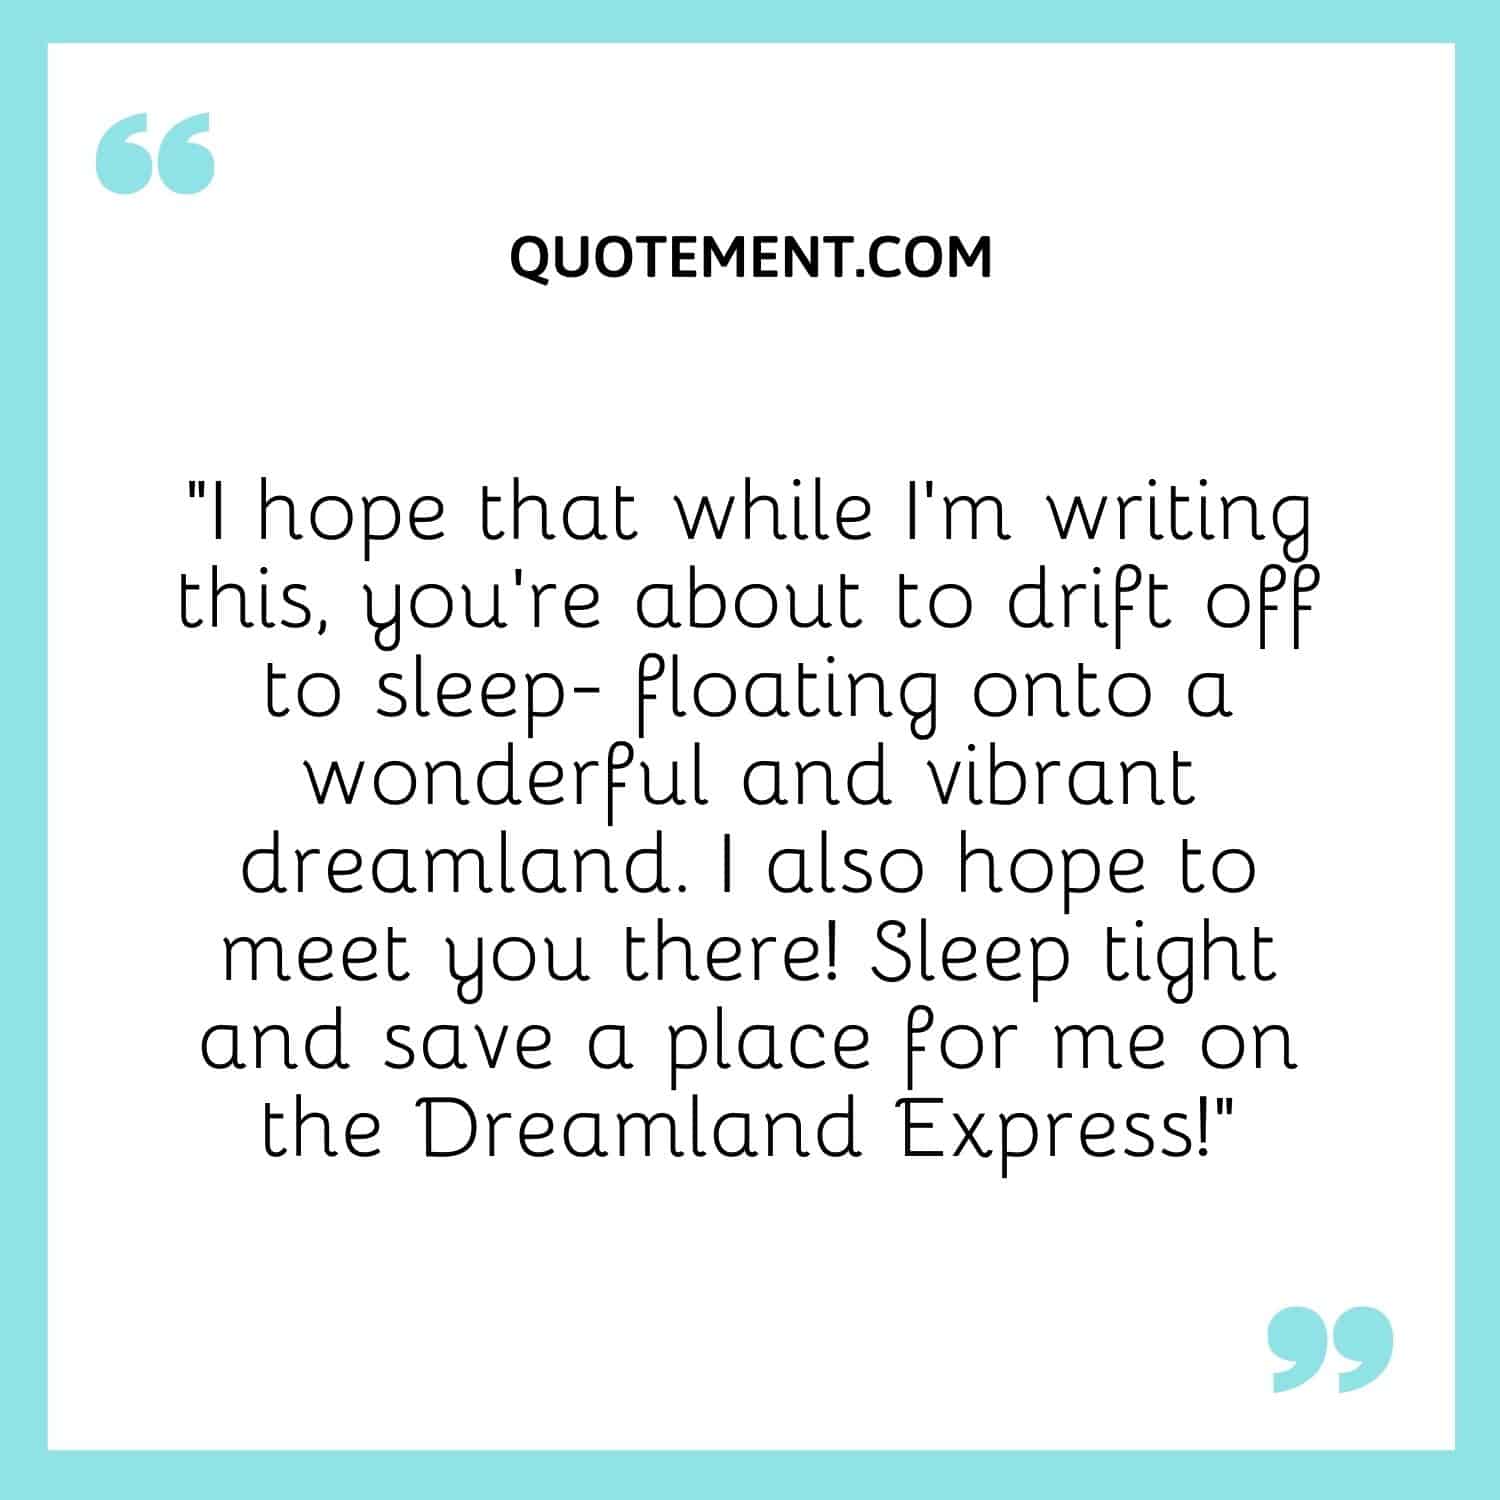 “I hope that while I’m writing this, you’re about to drift off to sleep- floating onto a wonderful and vibrant dreamland